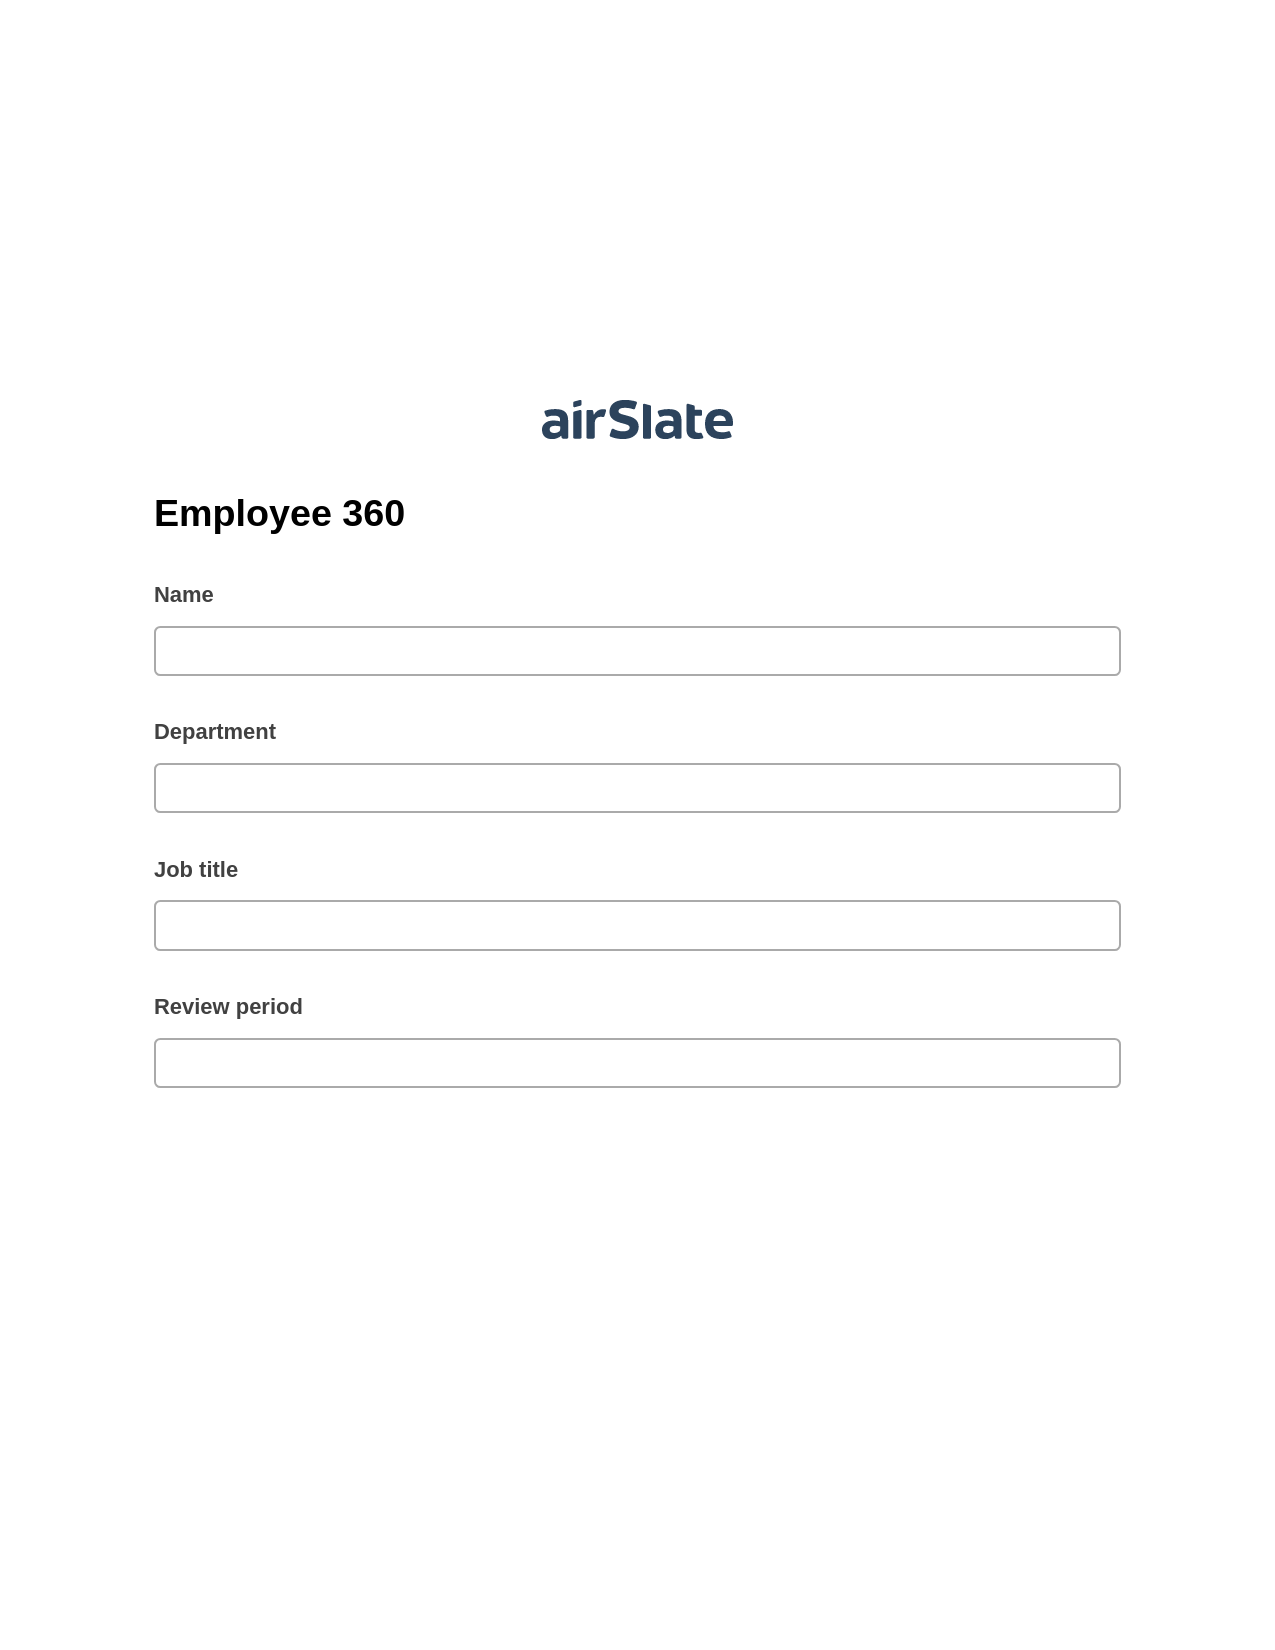 Multirole Employee 360 Pre-fill Document Bot, Hide Signatures Bot, Archive to SharePoint Folder Bot